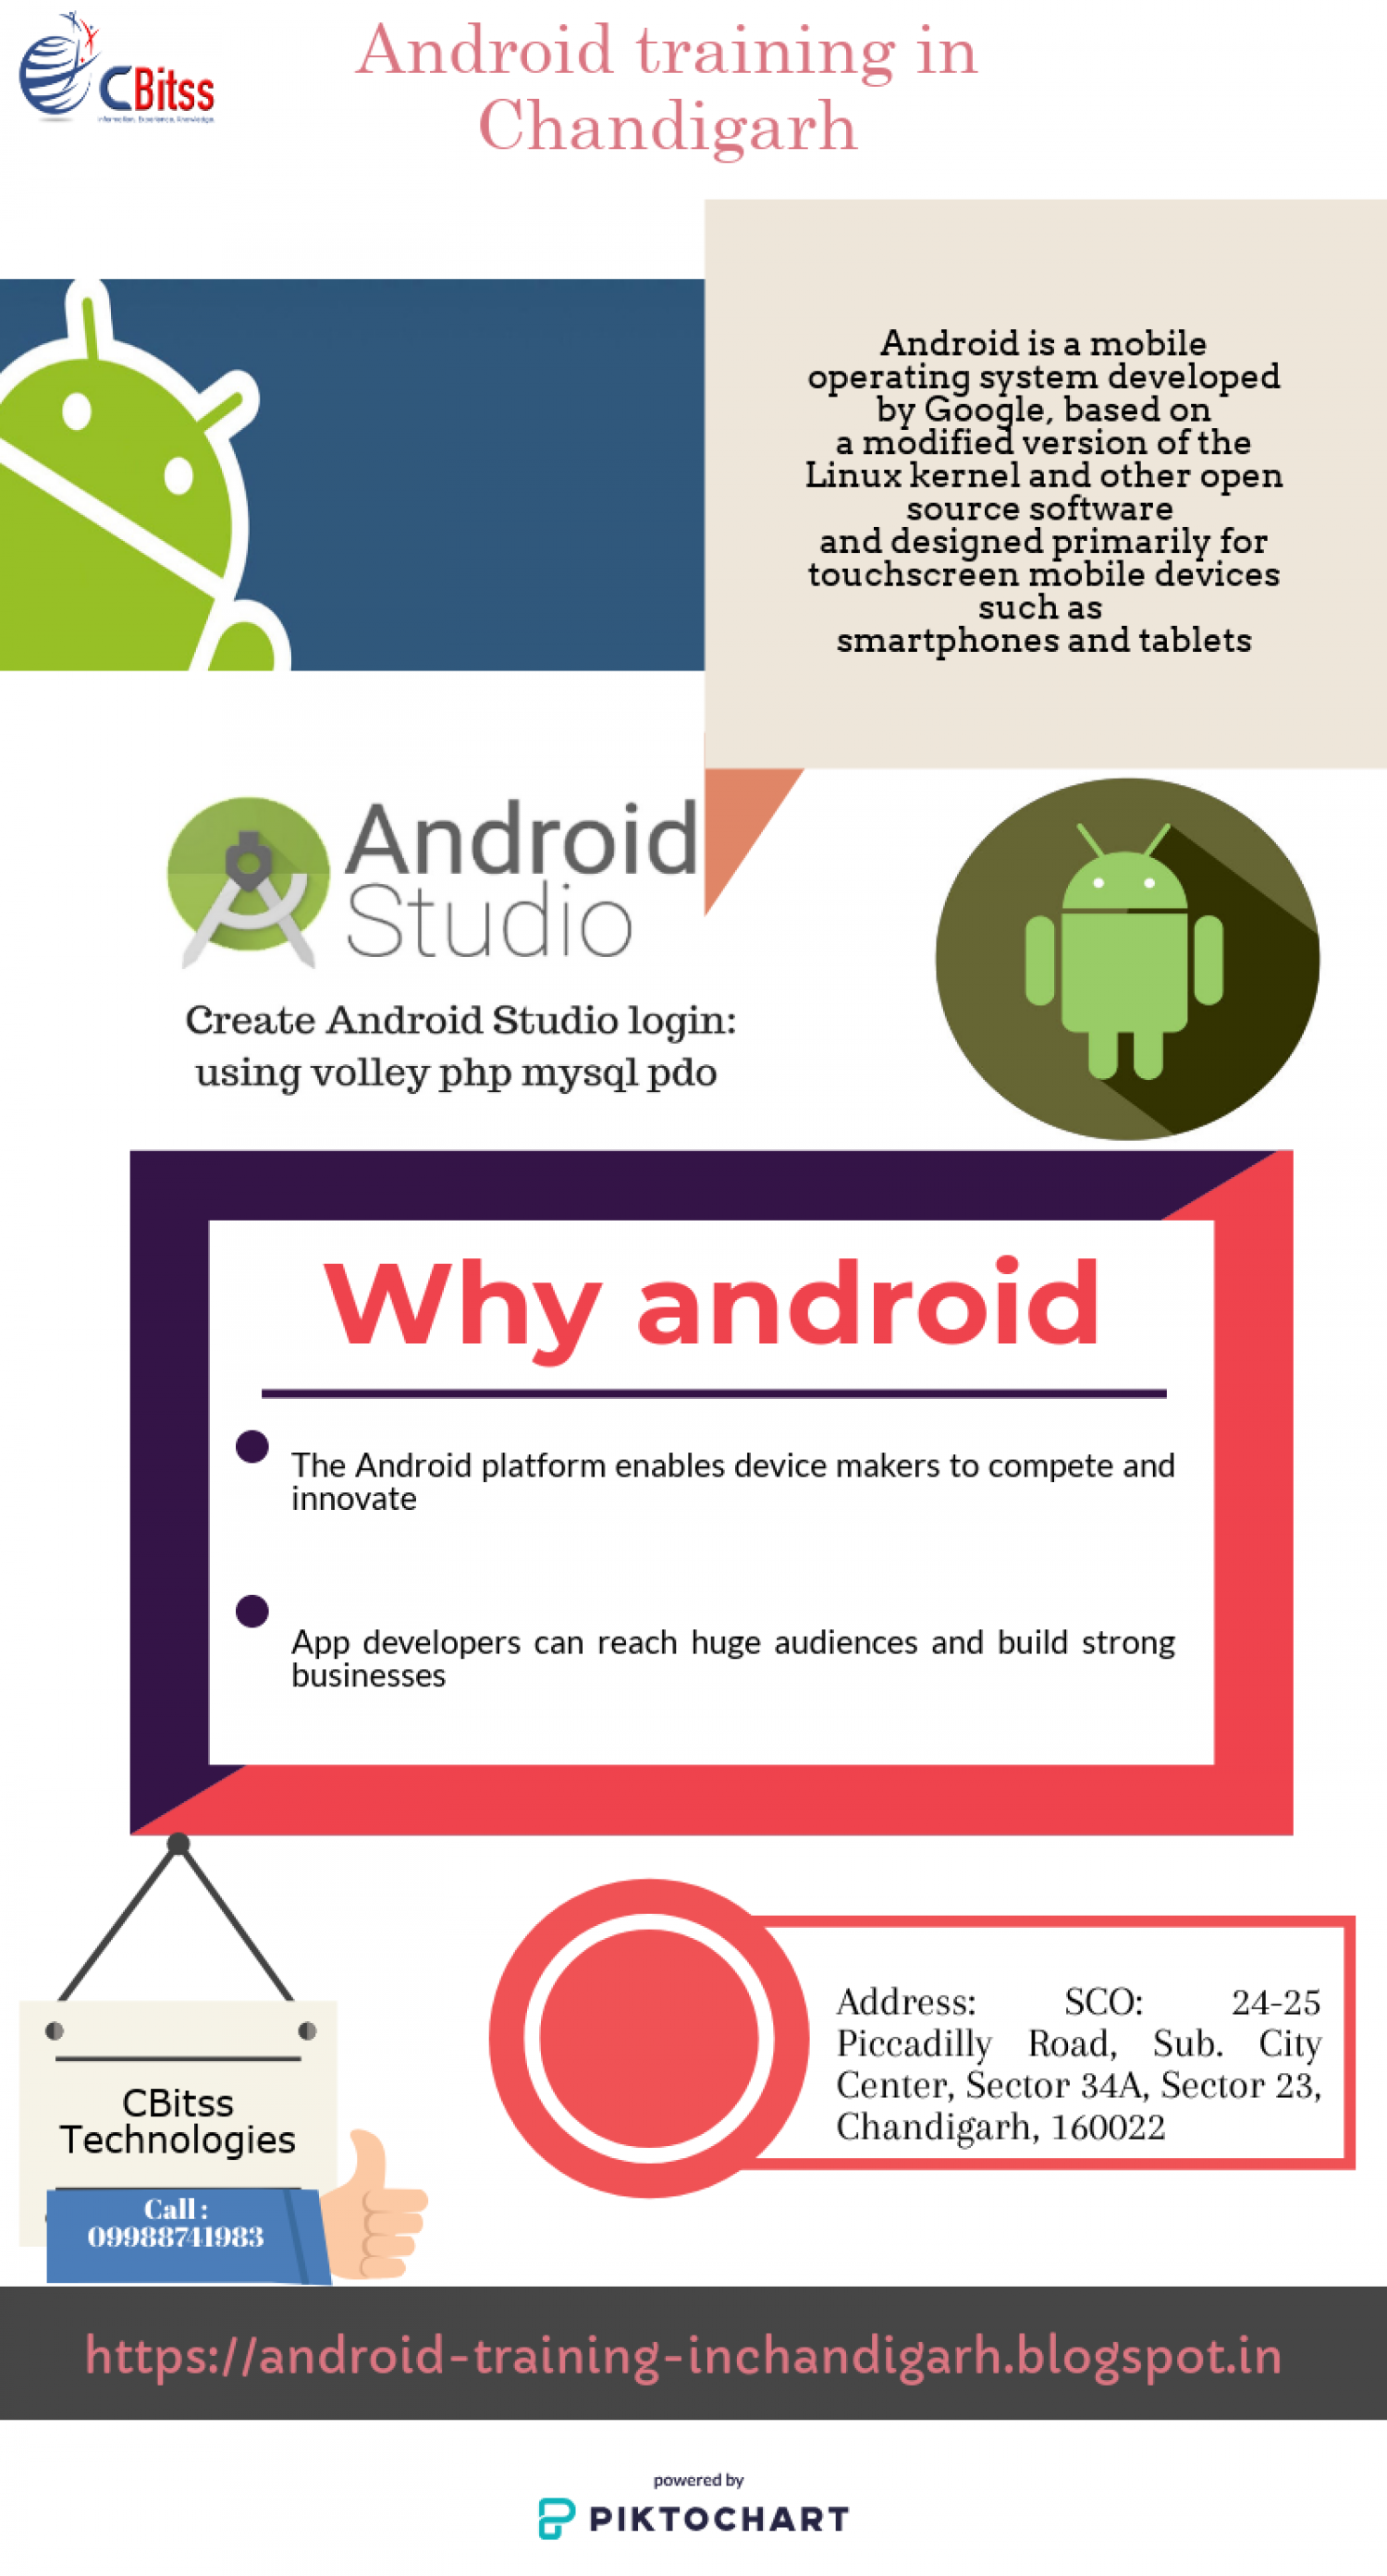 Android training in chandigarh Infographic